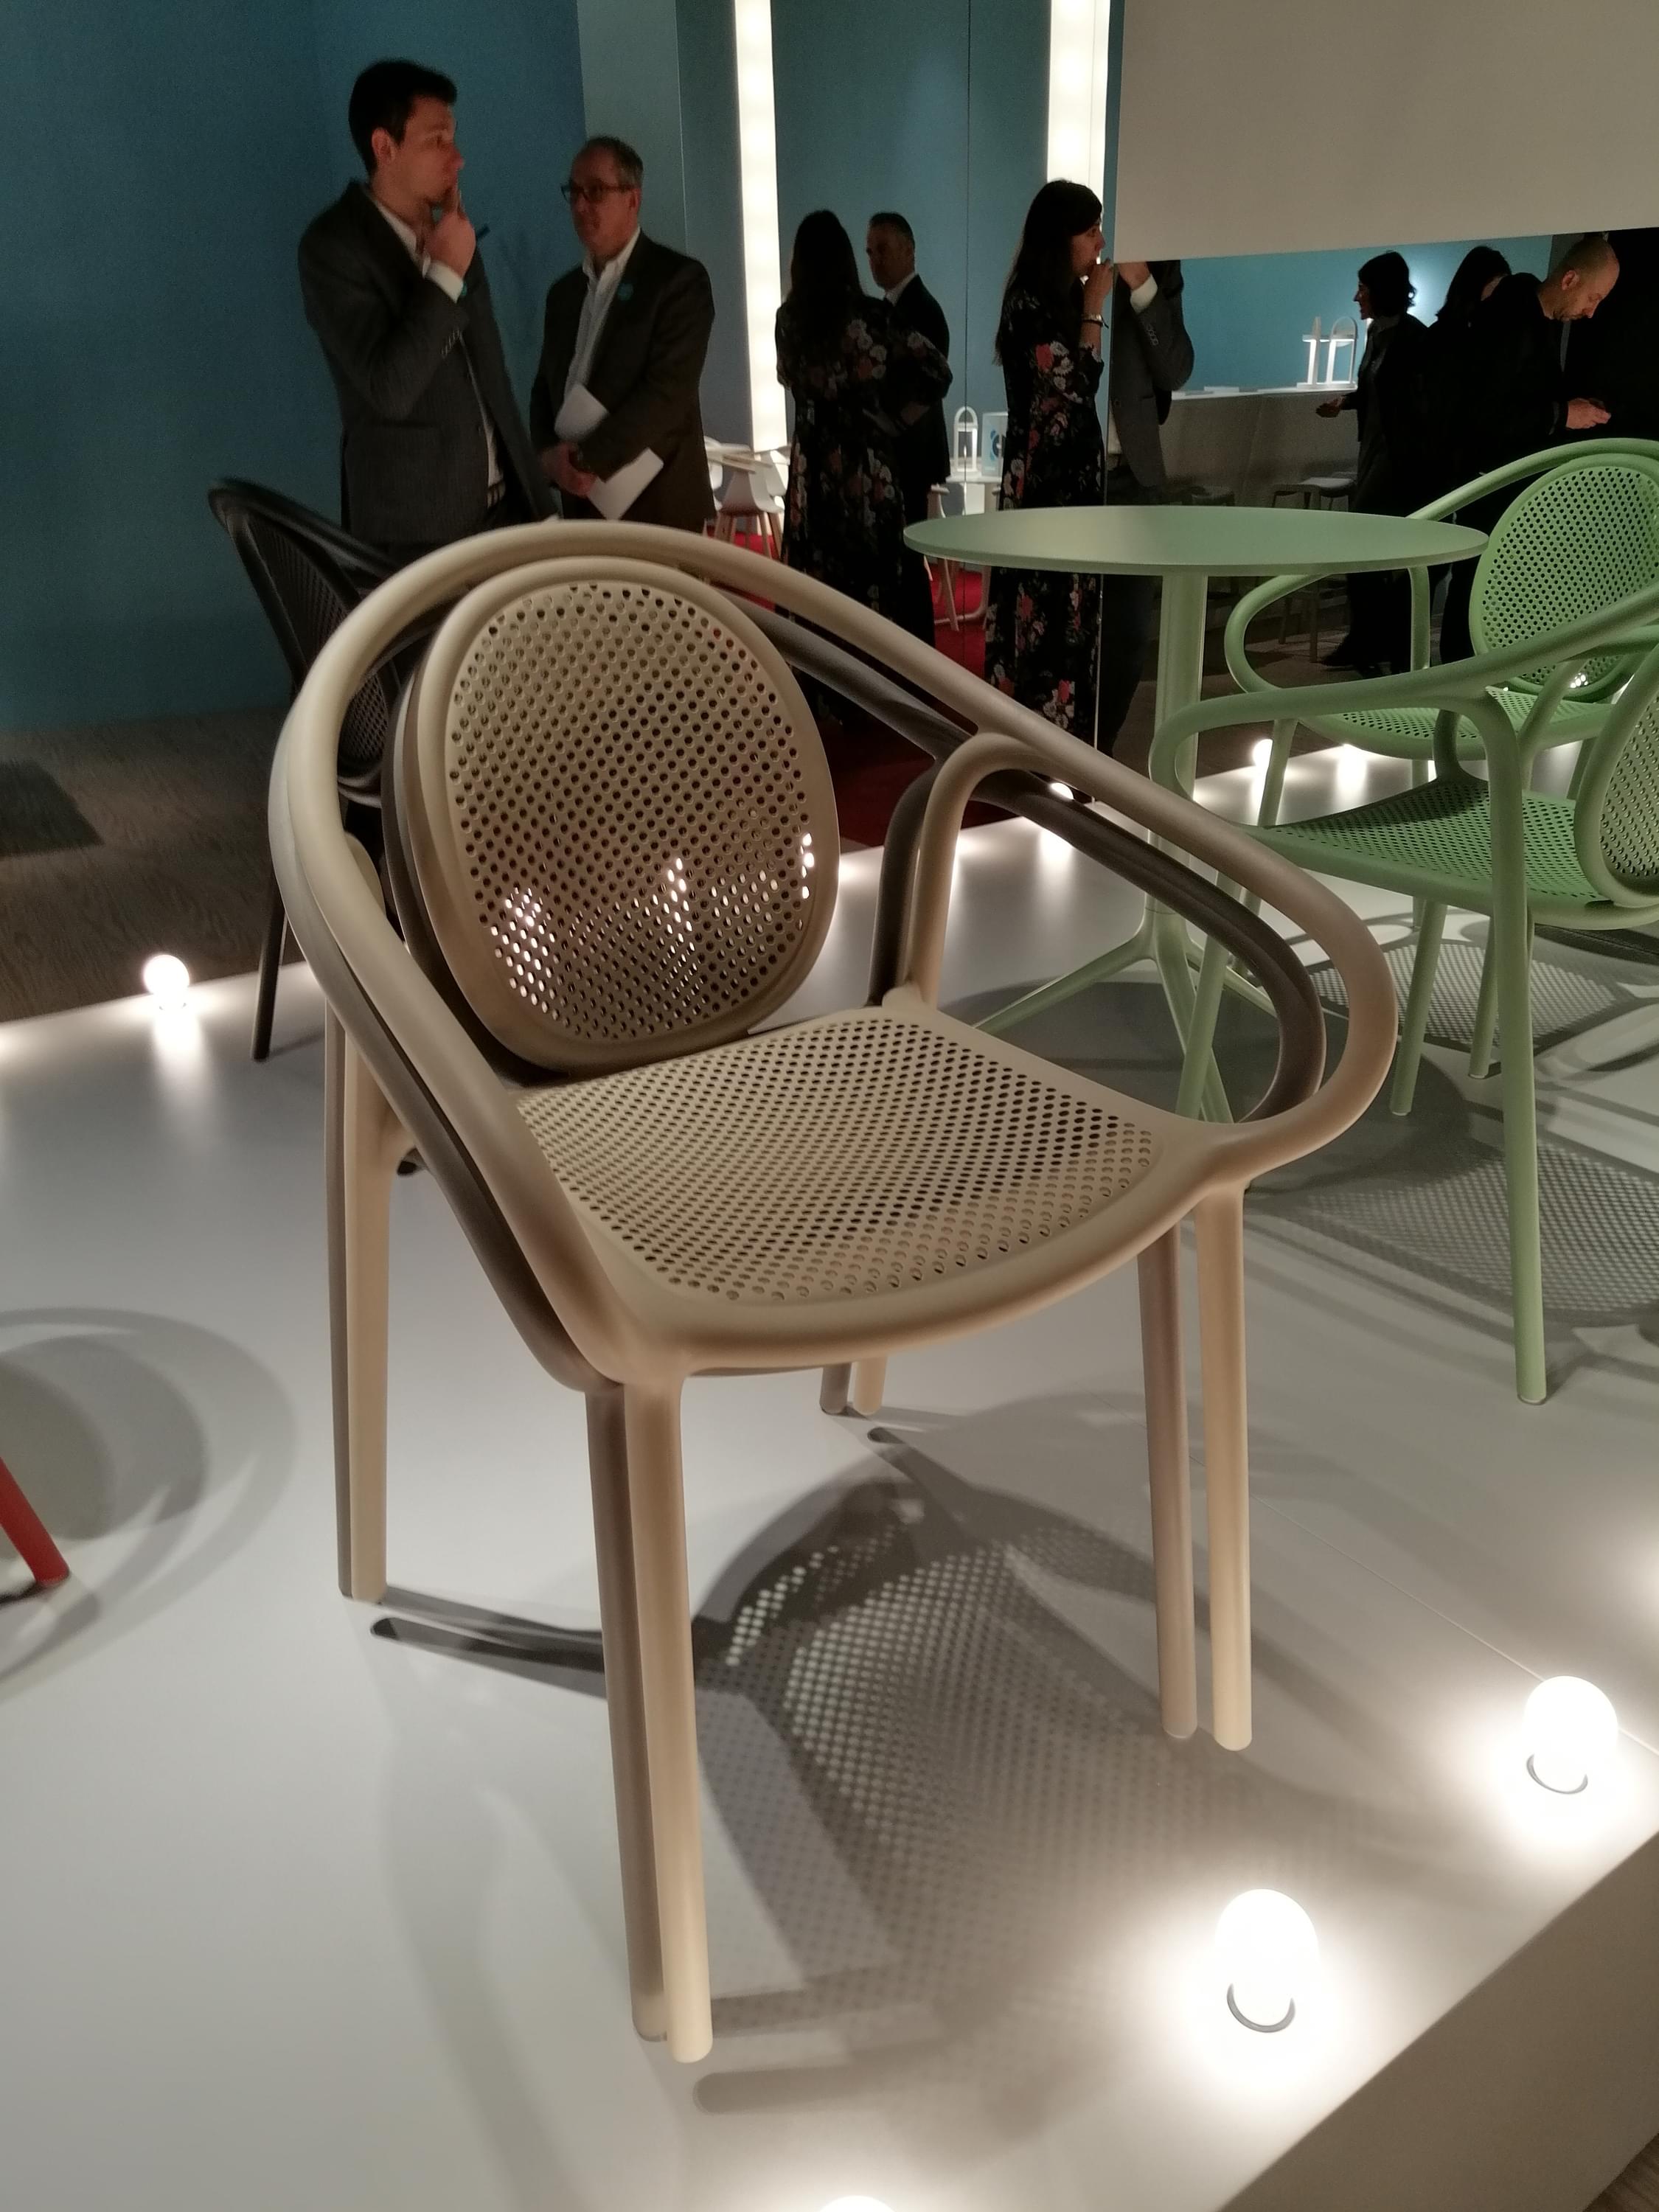 IMM-cologne-stacking-chairs-monotone-colour-trend-1.jpg#asset:180257